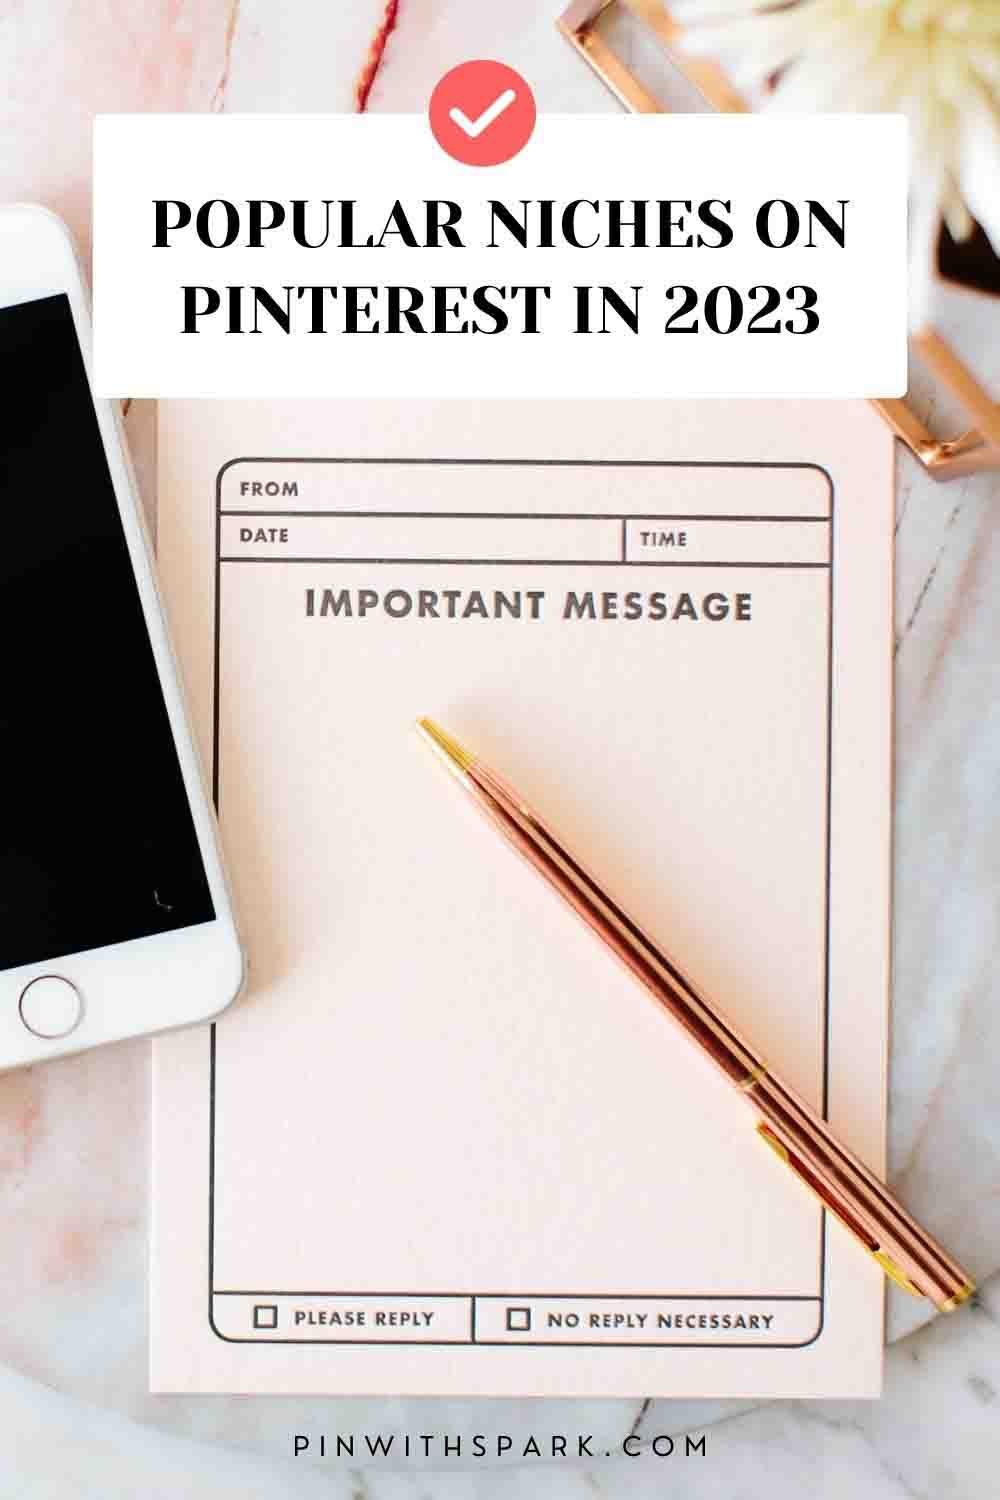 Popular Niches on Pinterest in 2023 text overlay pinwithspark.com